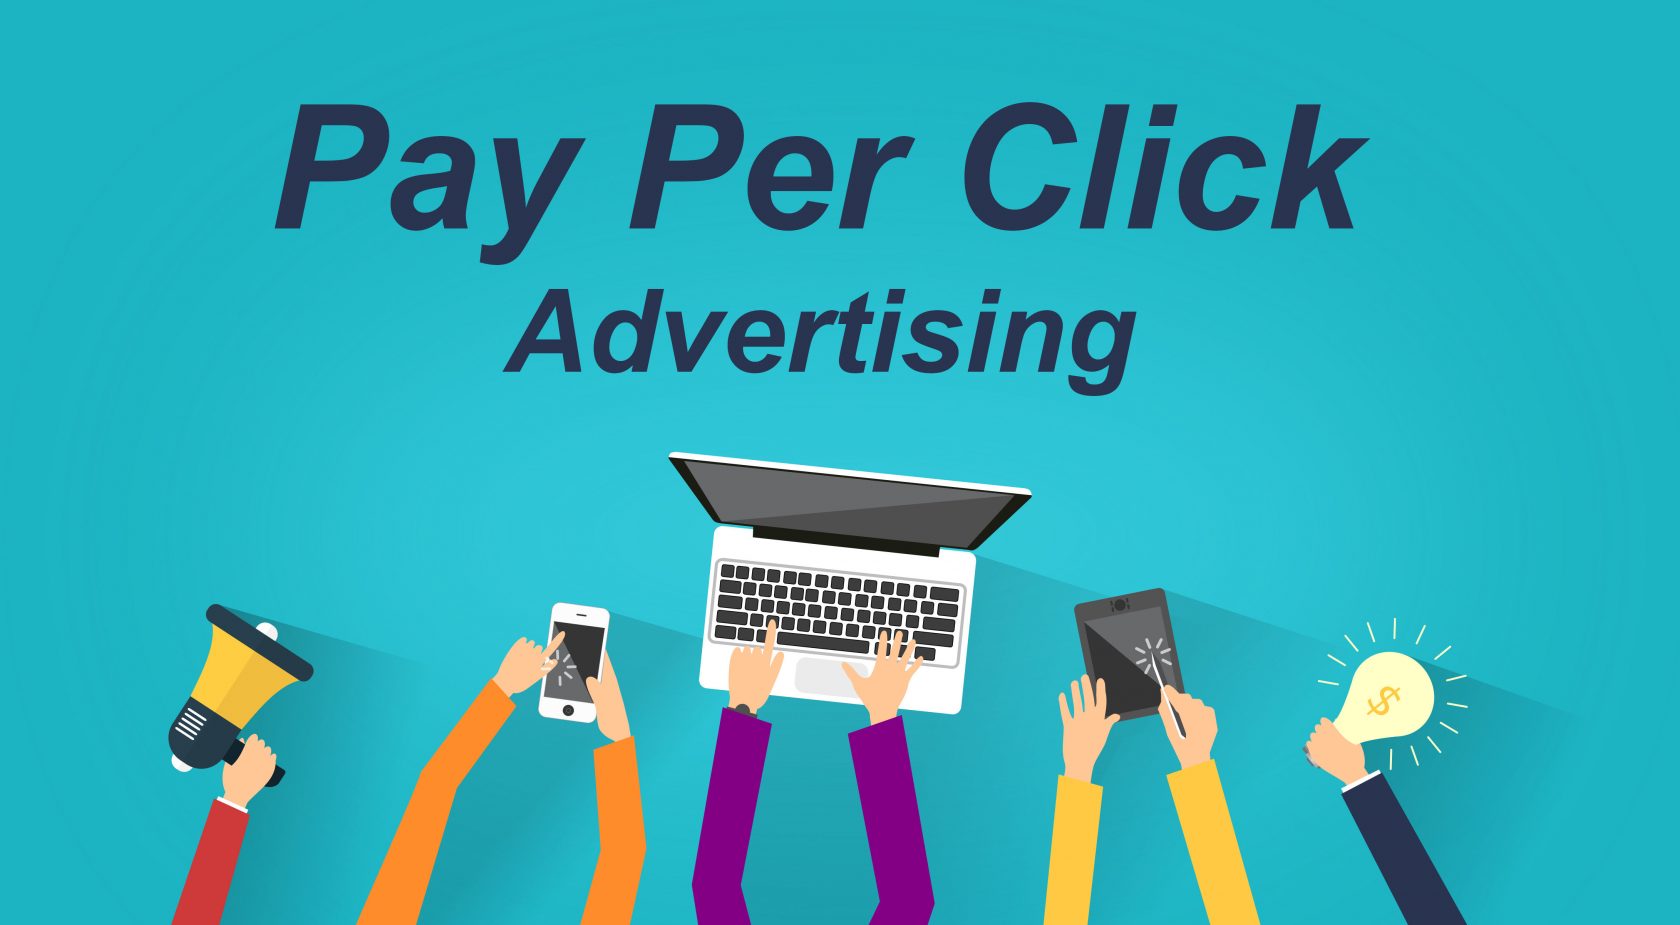 Why pay click Is the Marketing Strategy You Need to Drive Results